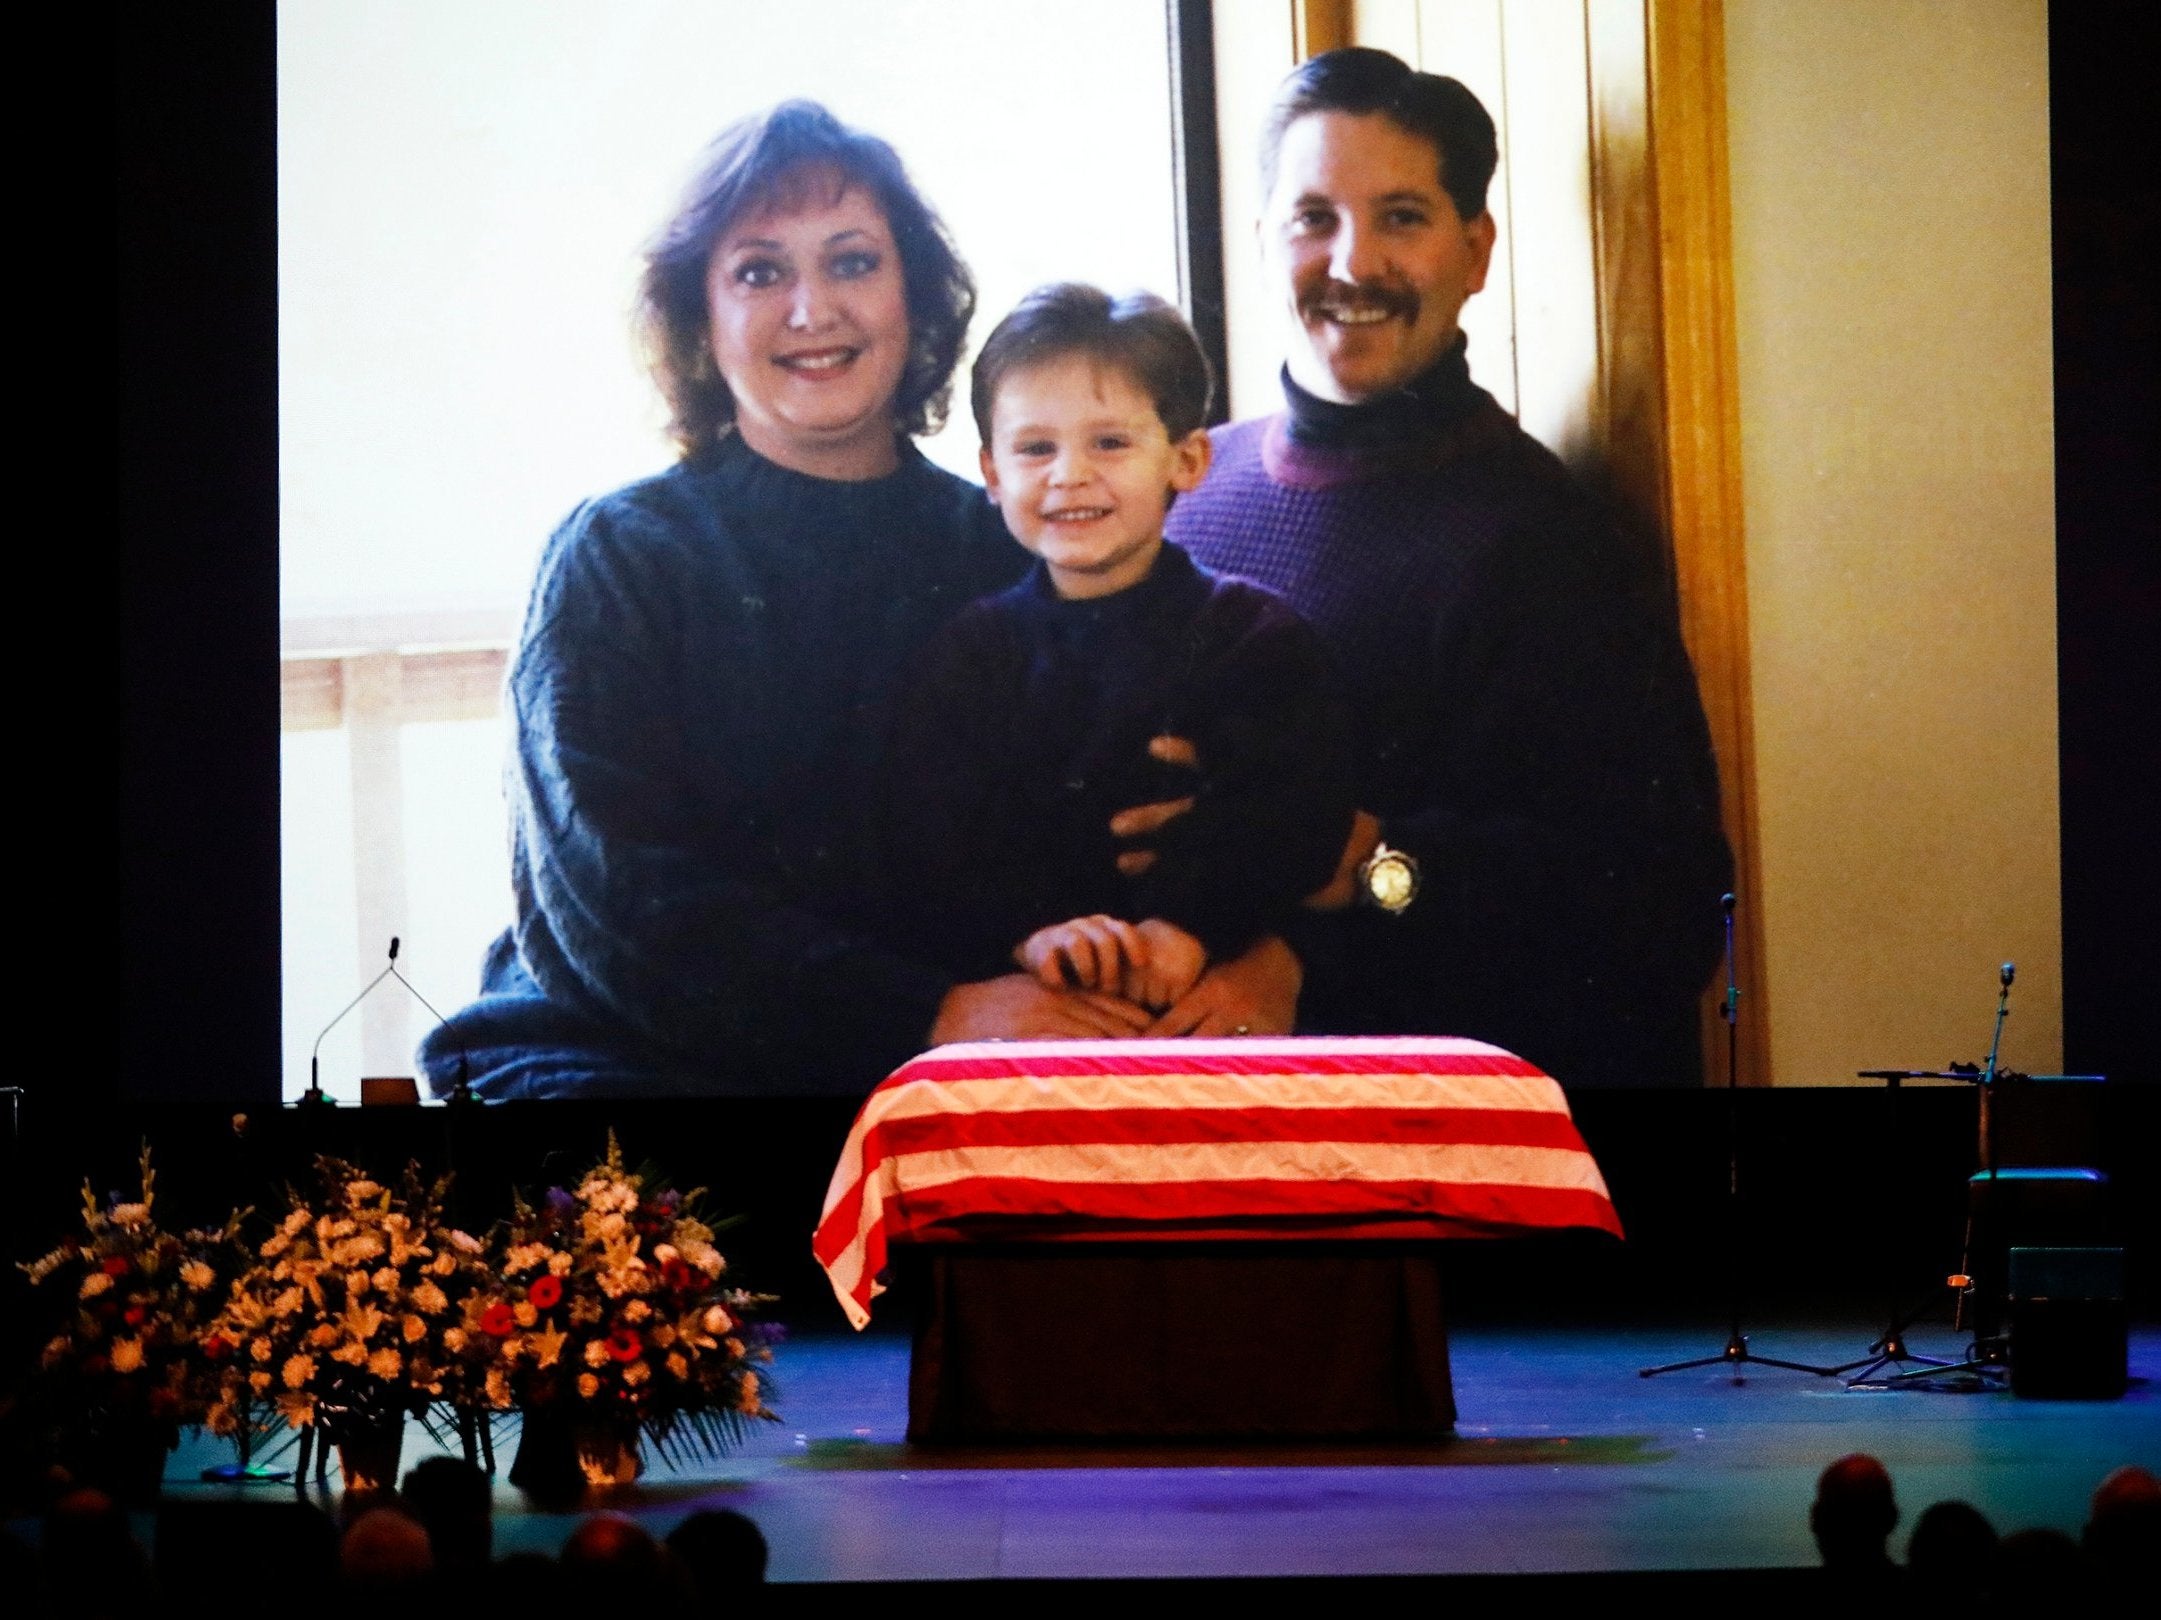 A family photo shown during a video montage of Ventura County Sheriff Sgt. Ron Helus with his wife Karen and son Jordan years ago. Sgt. Helus was one of twelve victims of the Borderline Bar &amp; Grill mass shooting in Thousand Oaks, California, on 7 November, 2018.